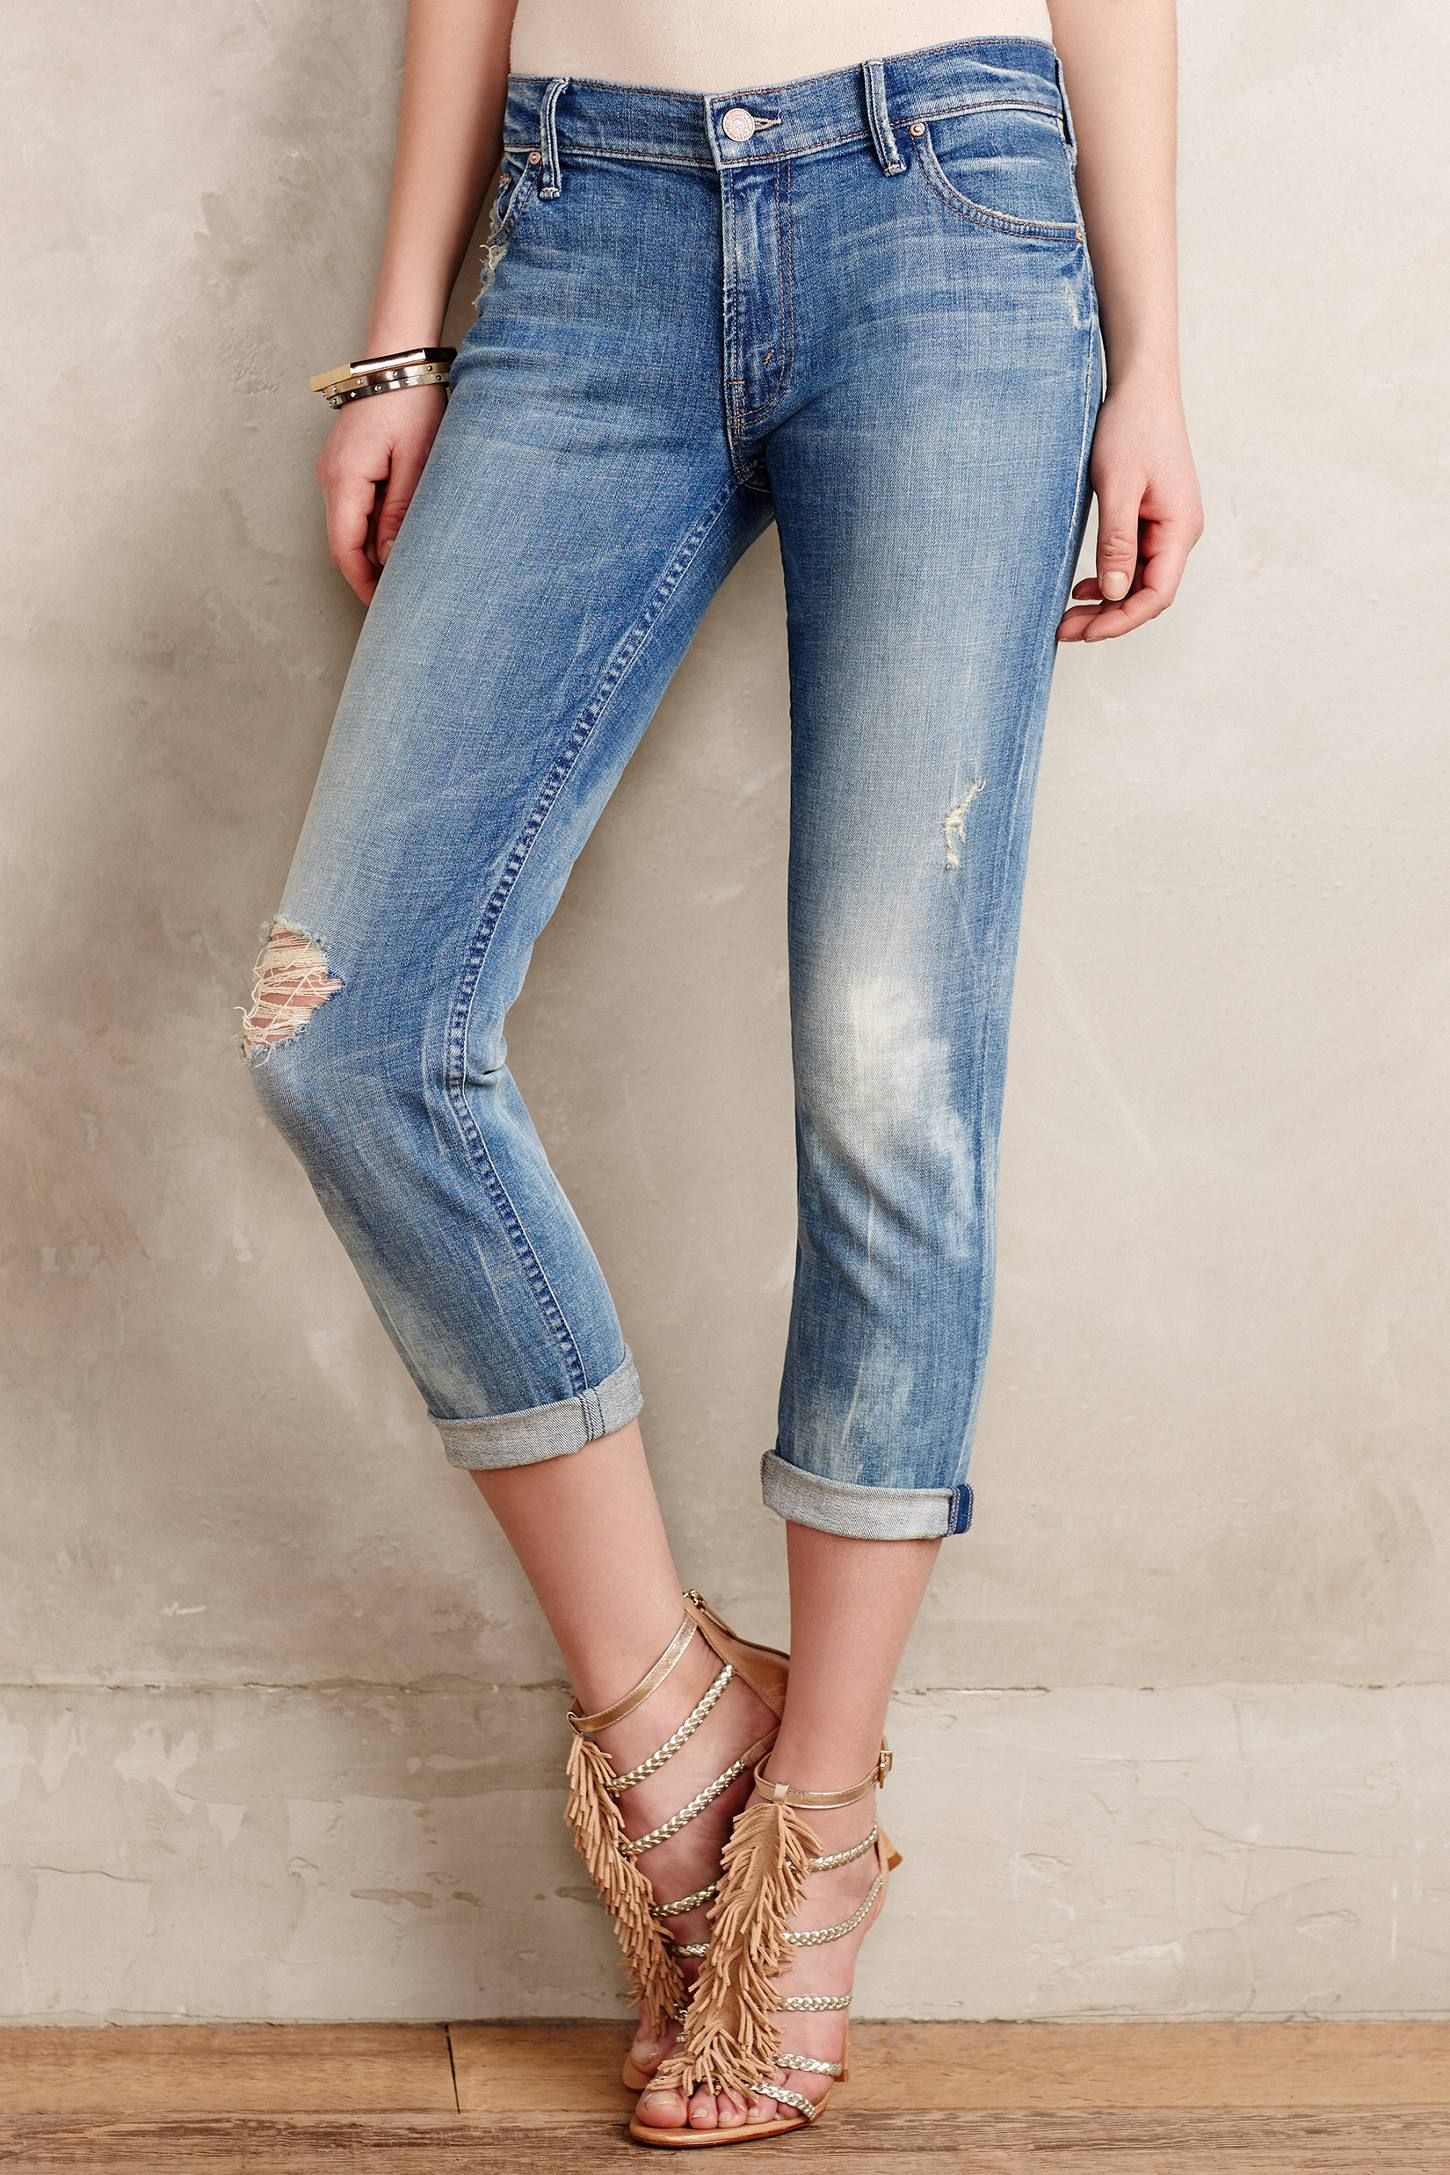 Lyst - Anthropologie Mother Dropout Jeans in Blue